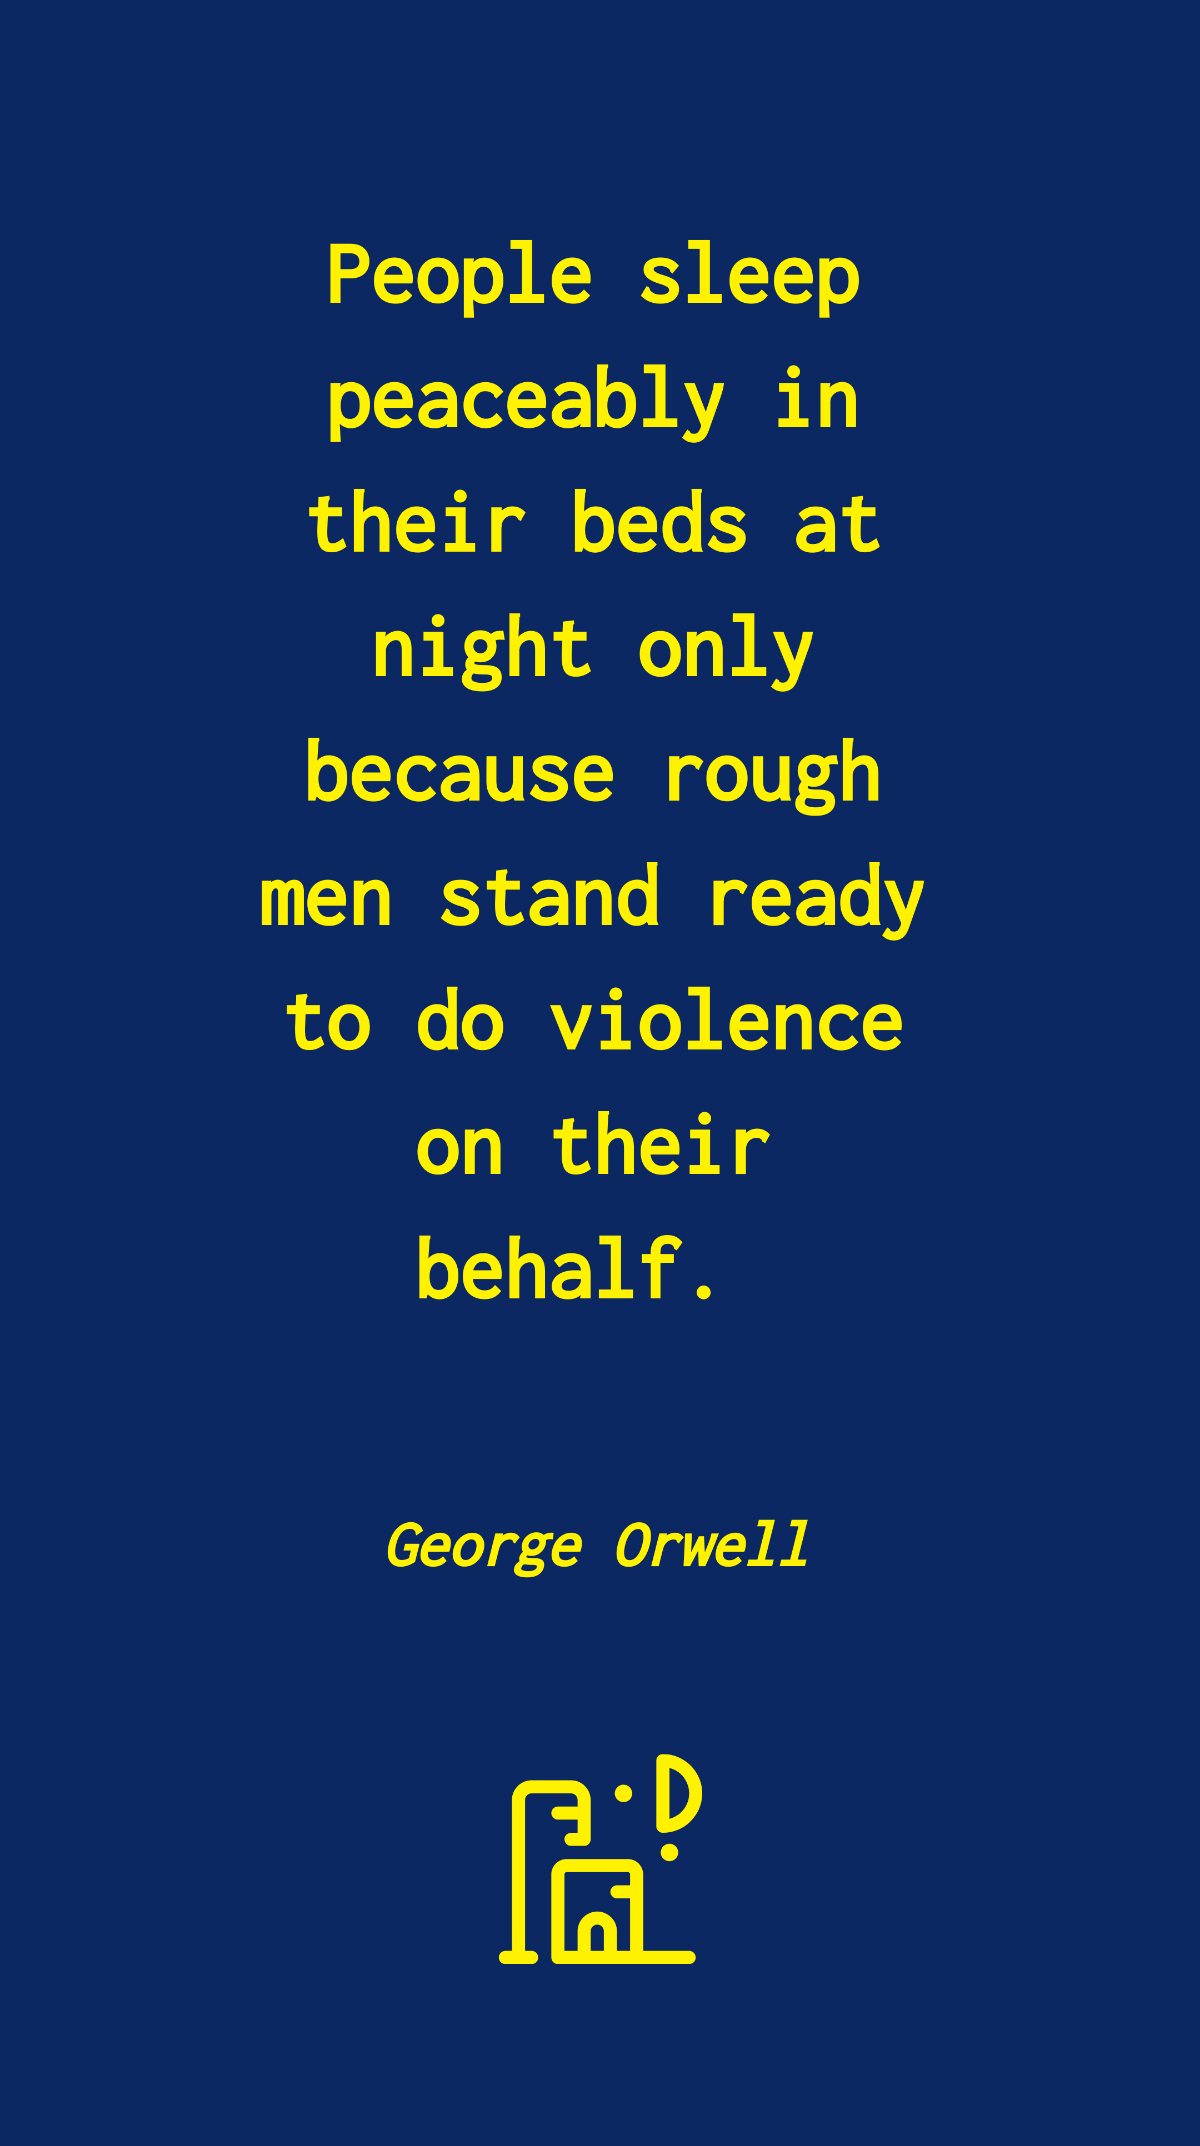 George Orwell - People sleep peaceably in their beds at night only because rough men stand ready to do violence on their behalf. Template